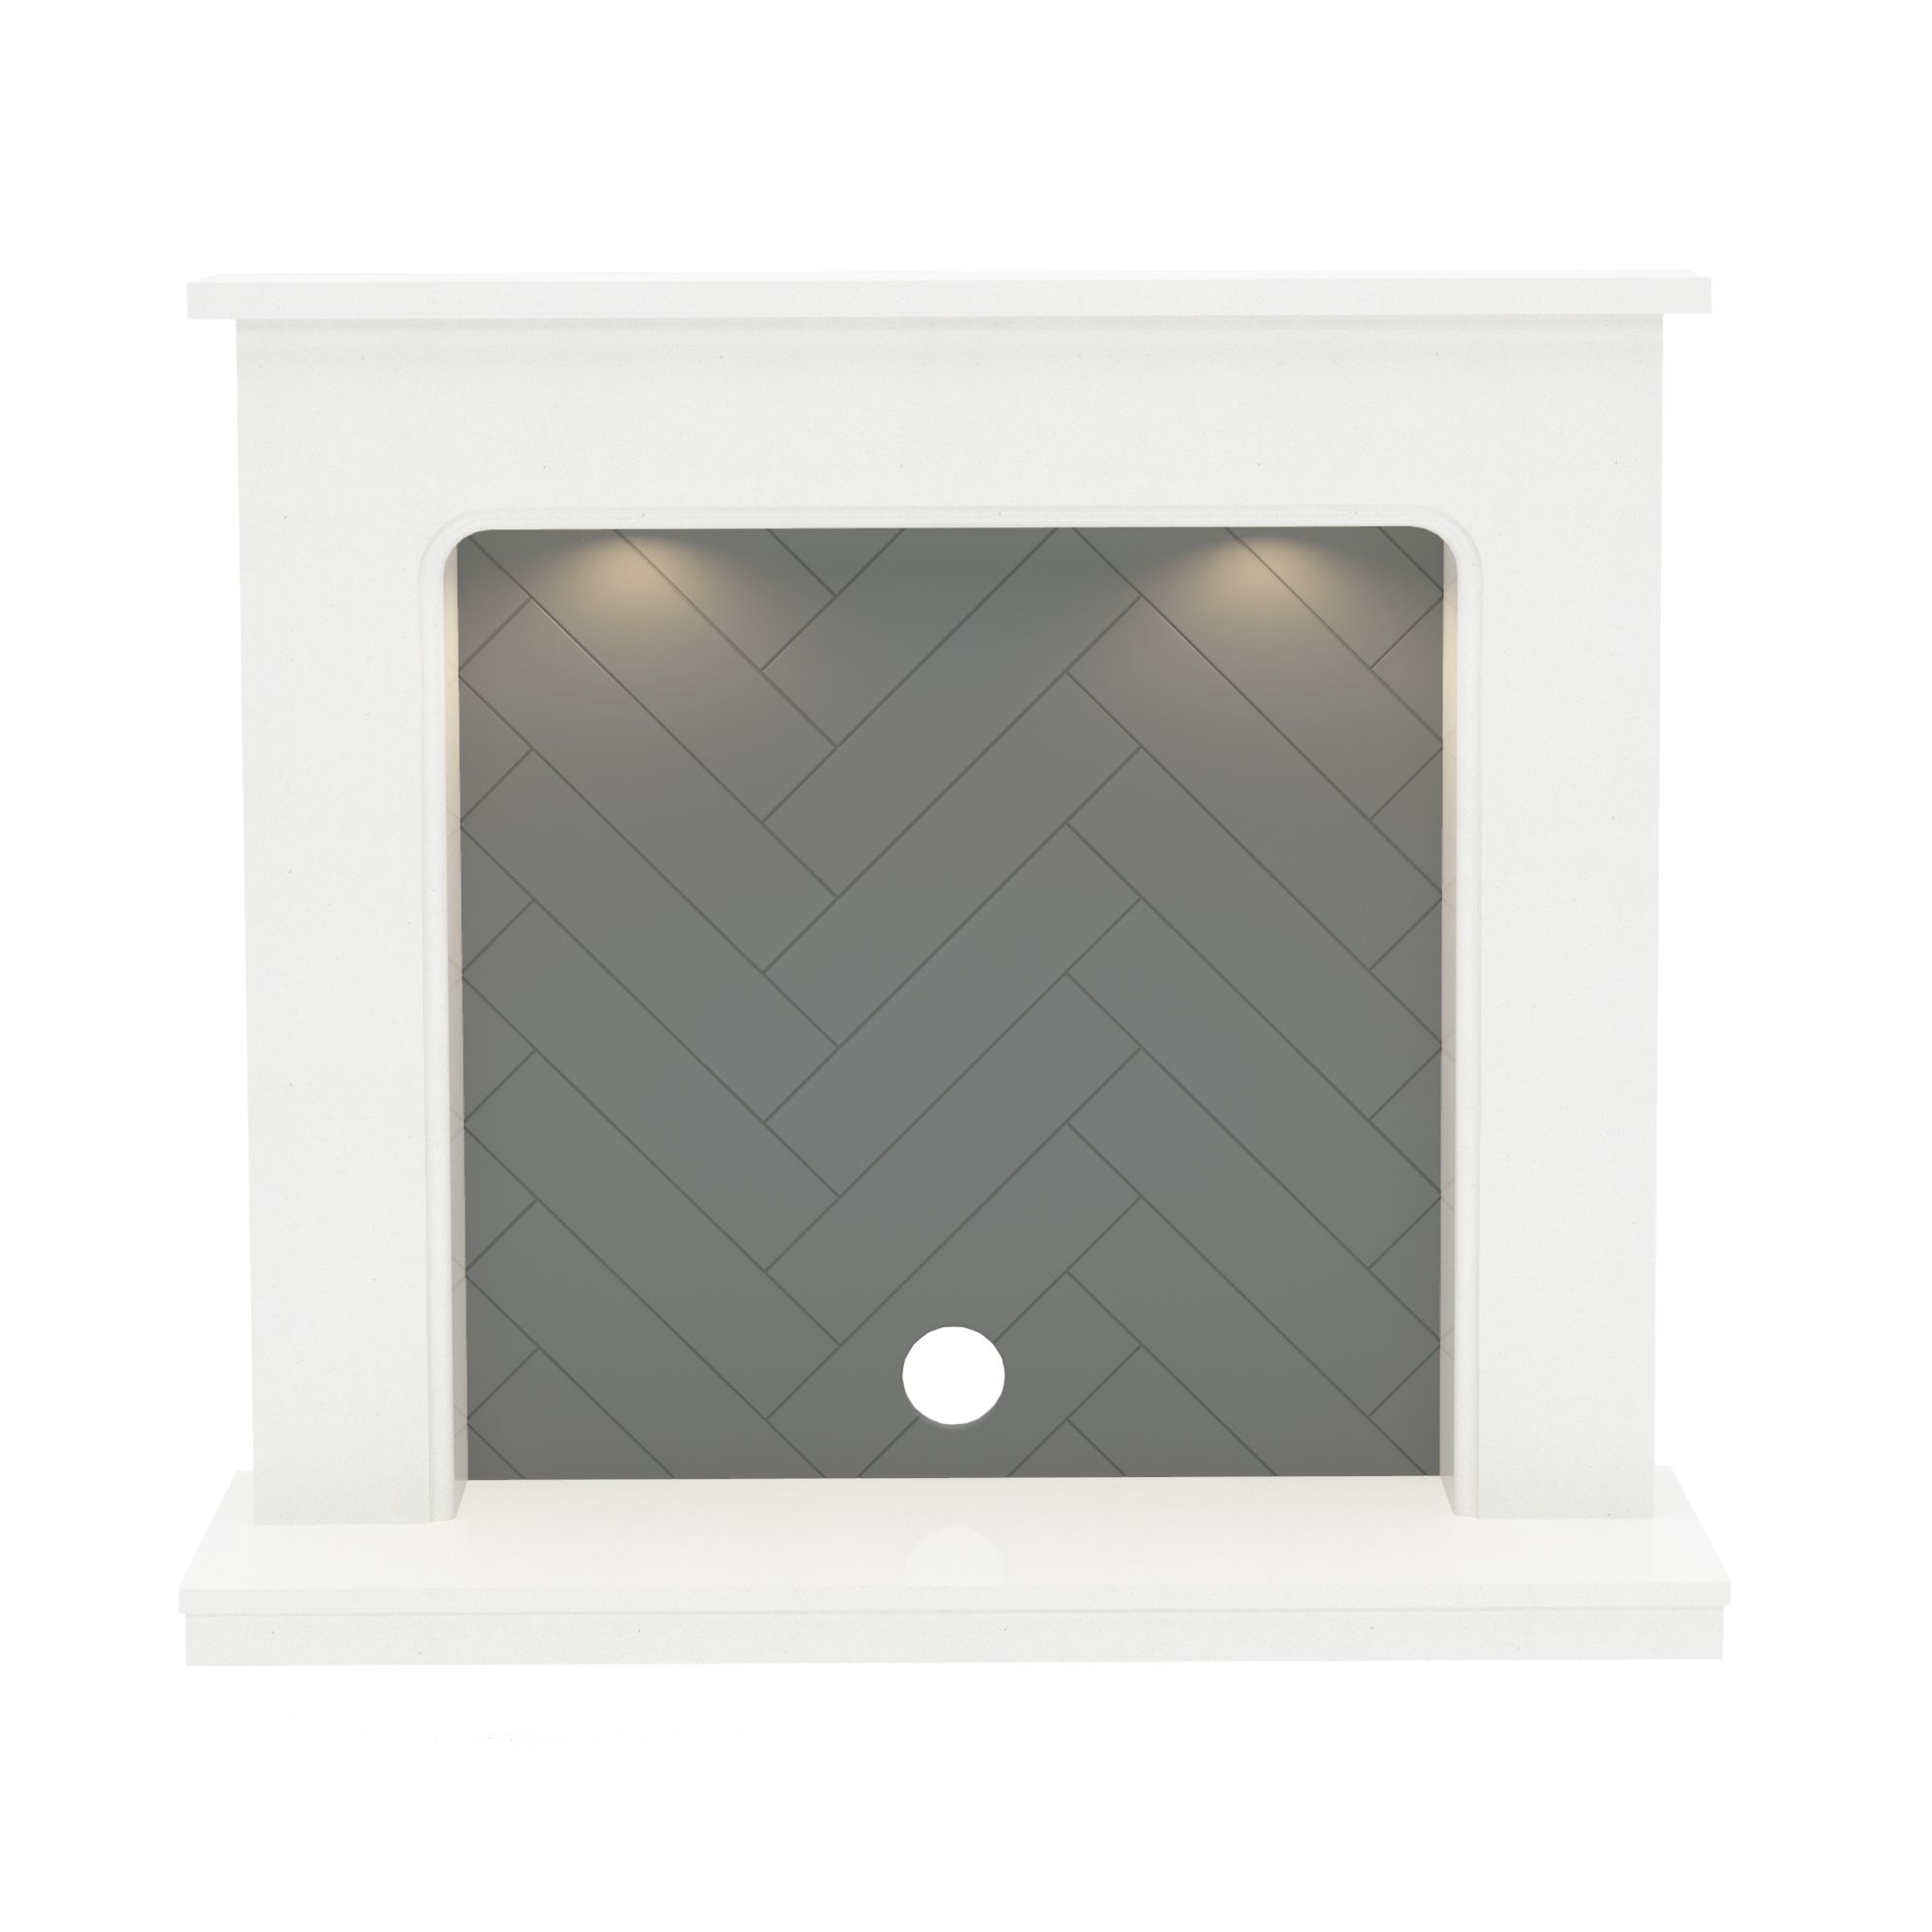 Be Modern Fontwell White marble & grey herringbone effect Fire surround set with Lights included